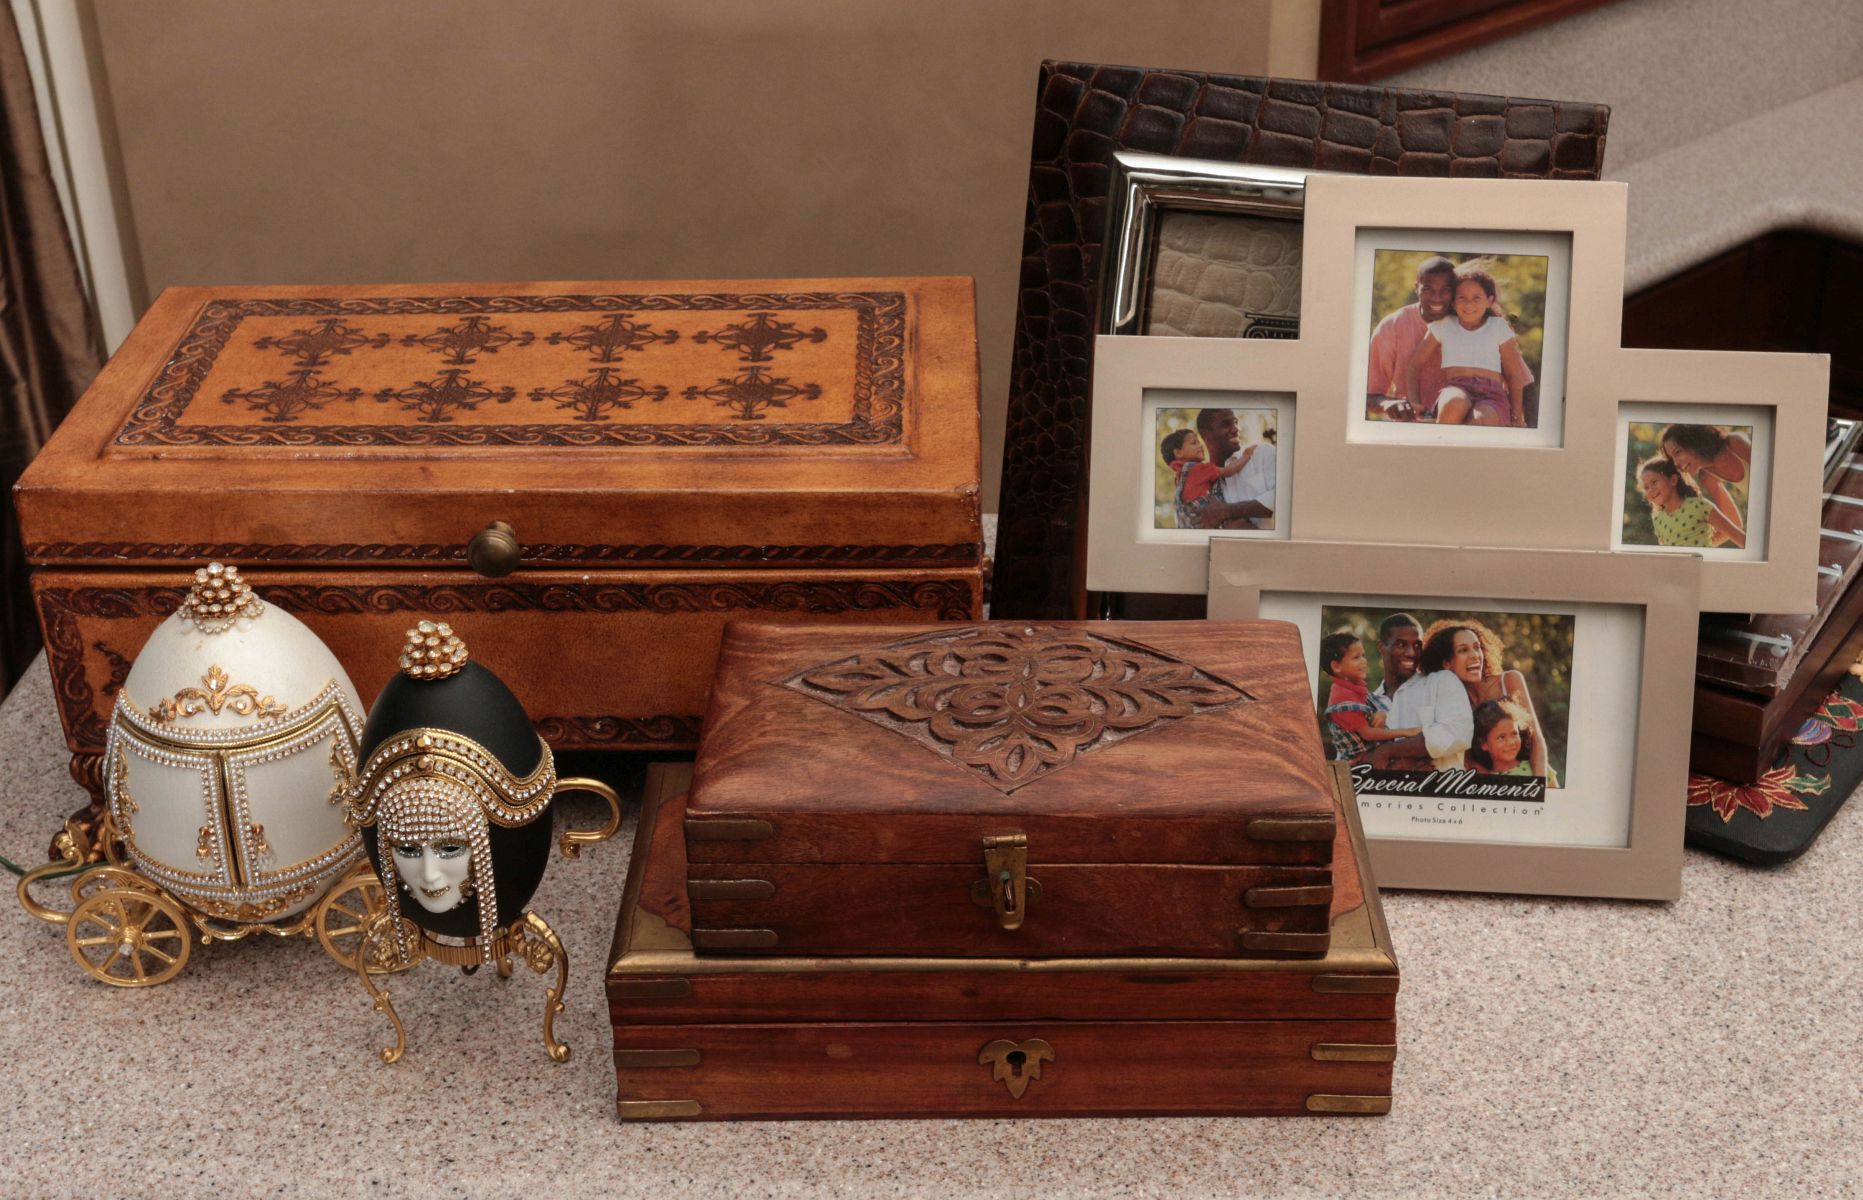 BOXES, FRAMES AND DECORATIVE ITEMS